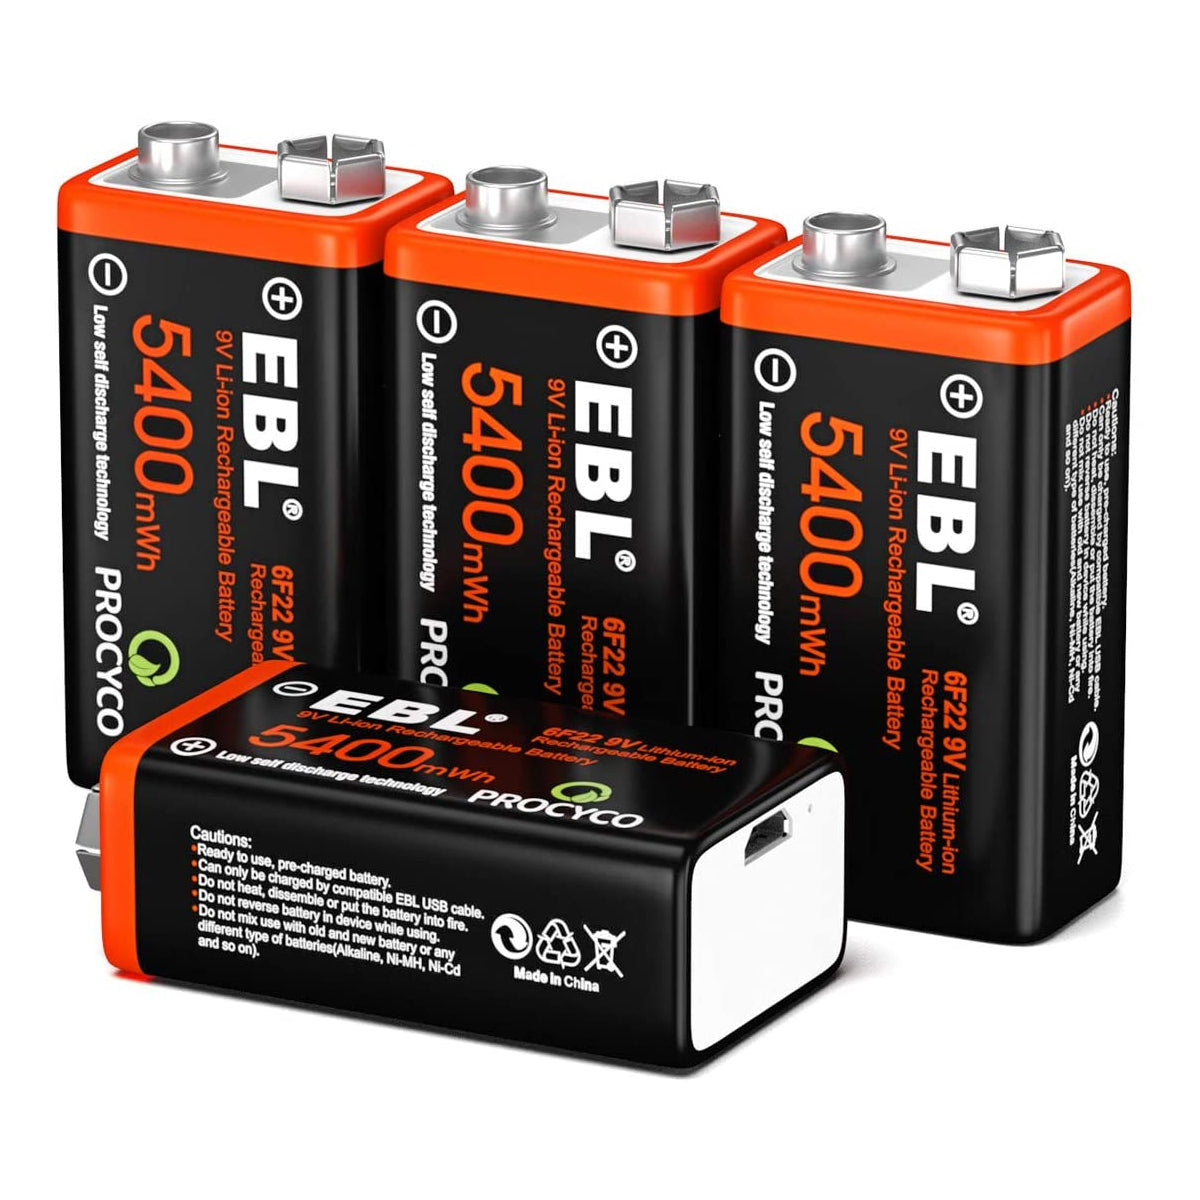 9v Rechargeable Batteries Charger, Rechargeable Battery 9v 600mah